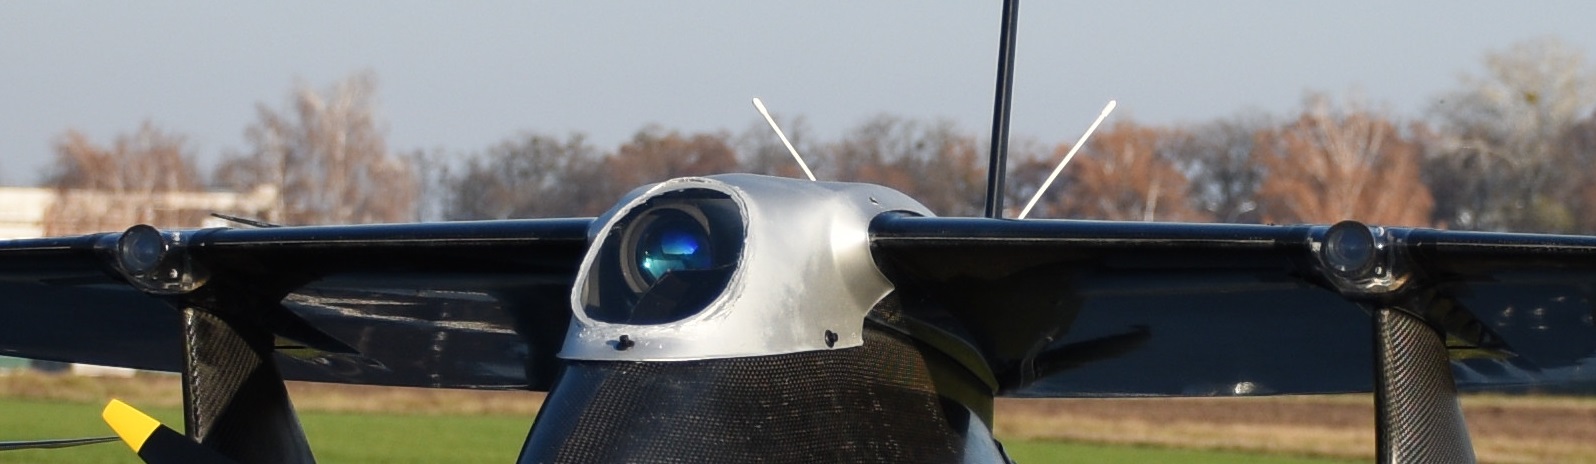 The hybrid computer vision system, a part of sensor fusion, that detects obstacles and reconstructs the terrain 100 meters ahead with 10 cm precision.